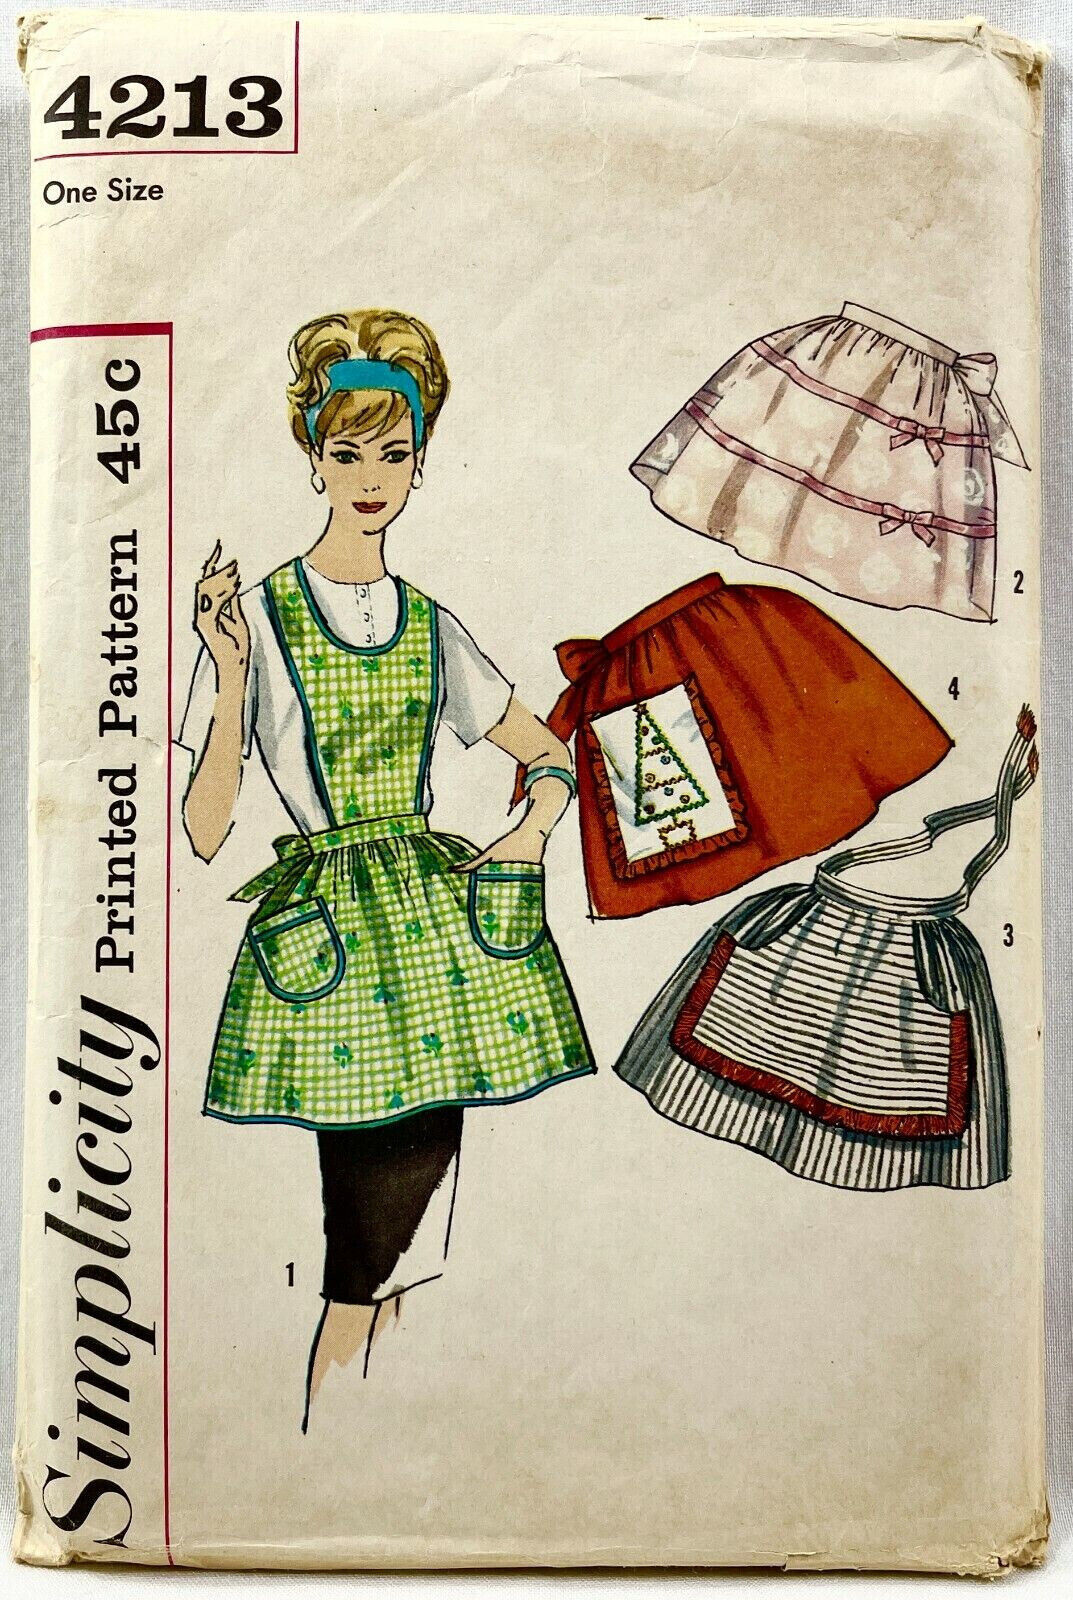 1960s Simplicity Sewing Pattern 4213 Womens Full & Half Aprons 4 Styles OS 11253